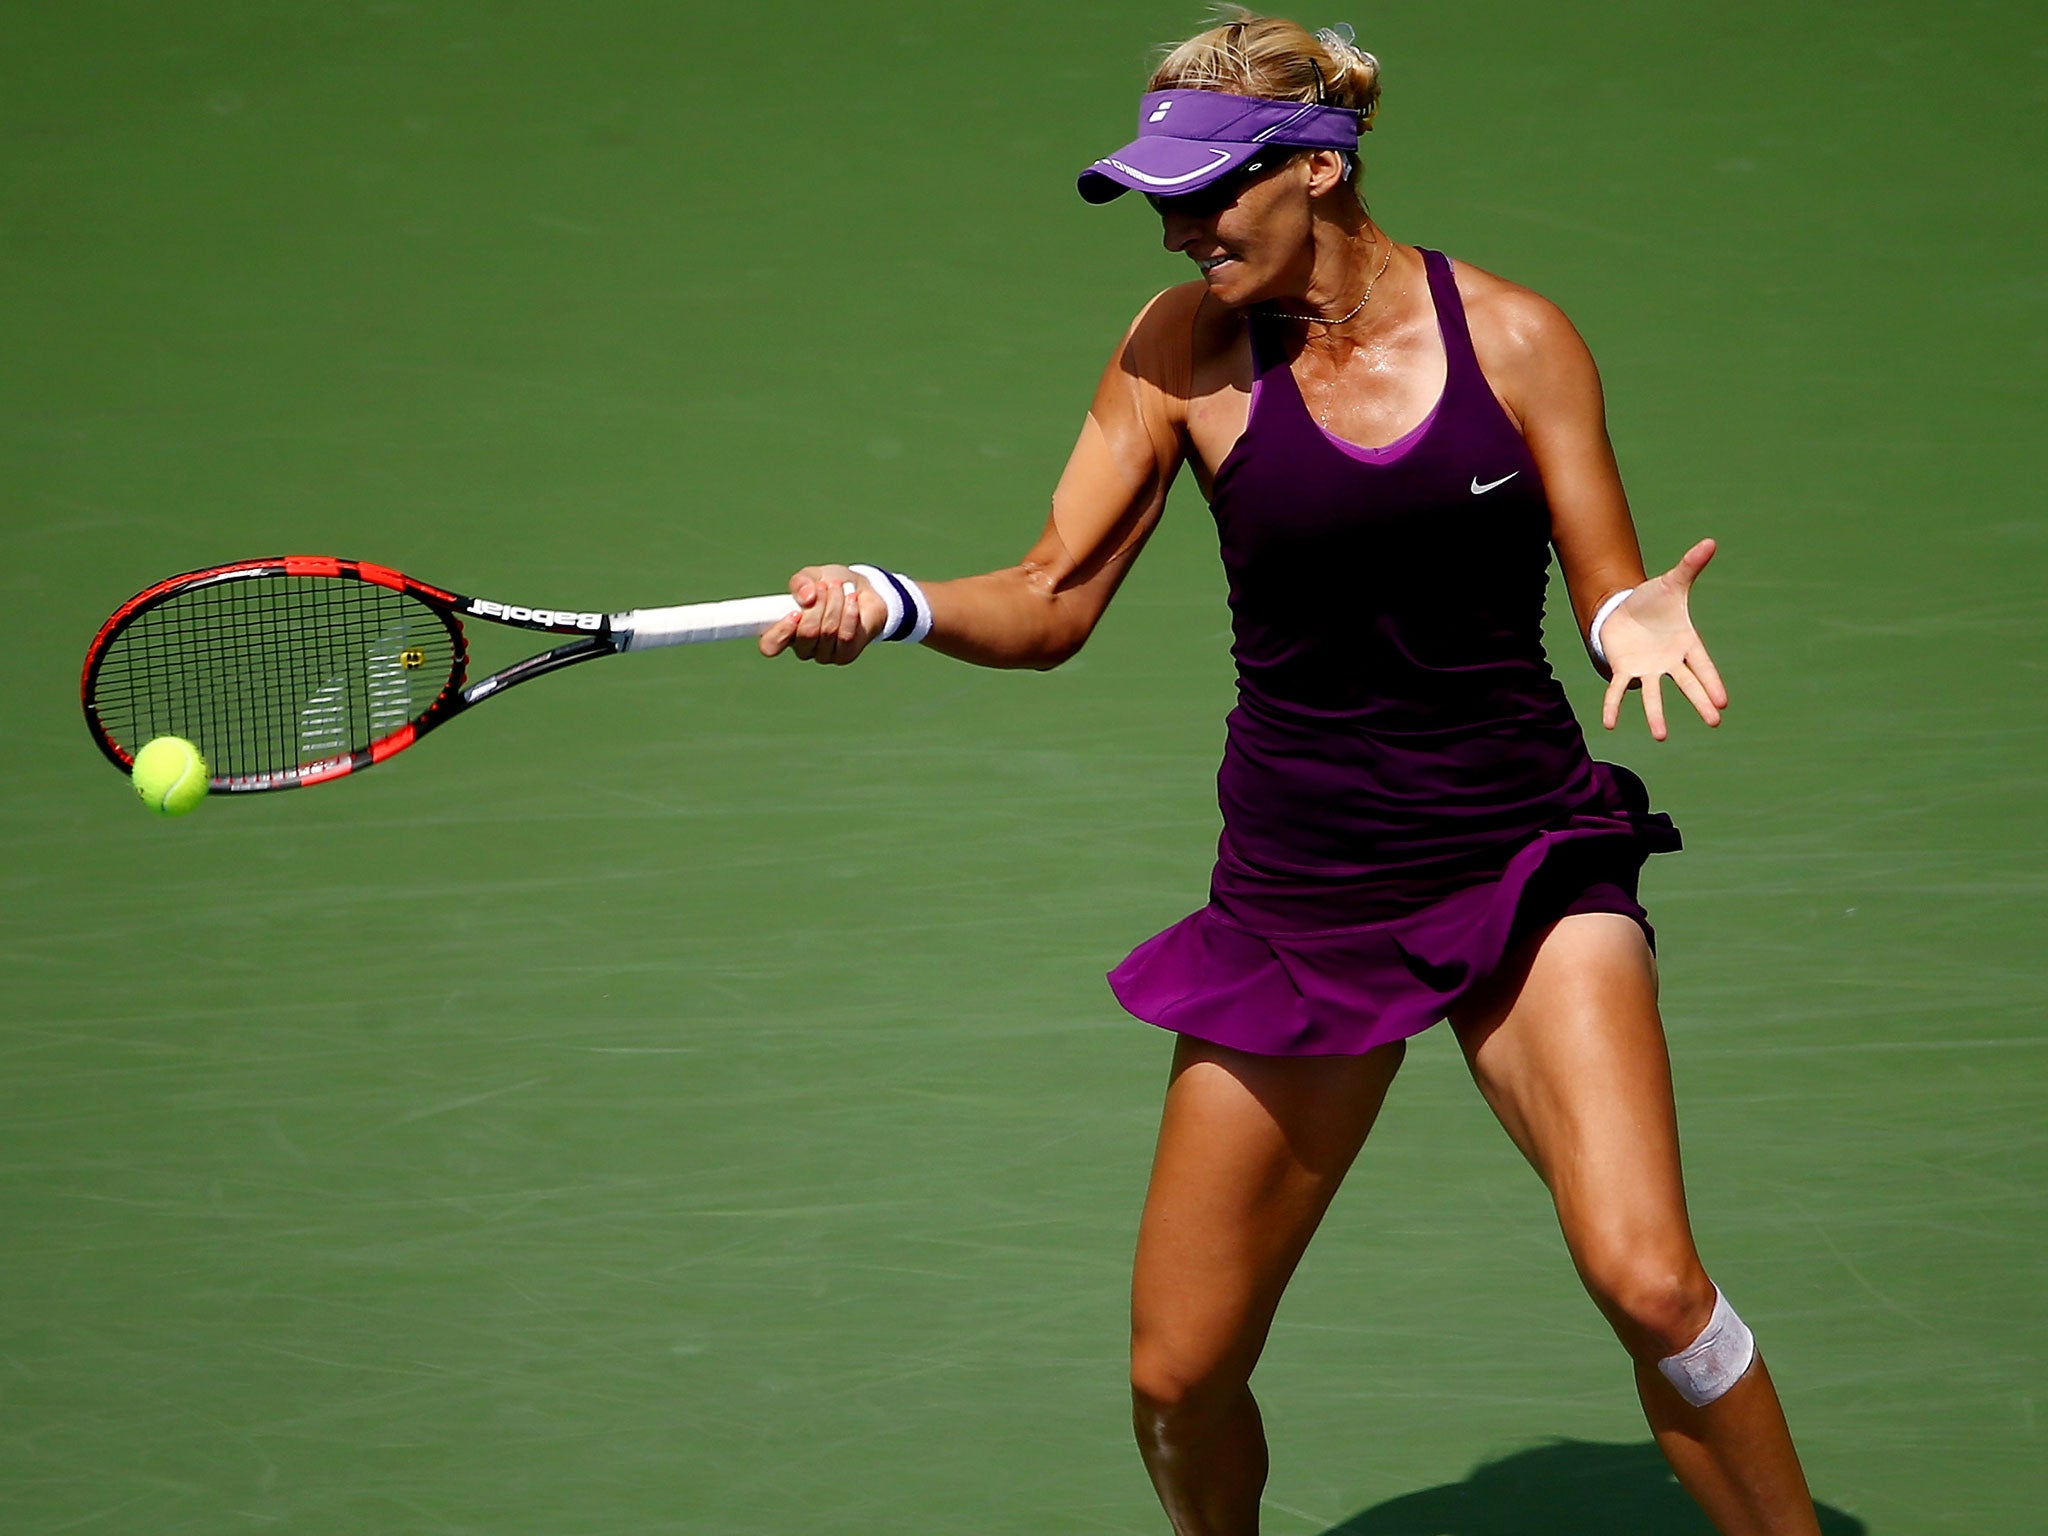 Mirjana Lucic-Baroni won the title in Quebec 16 years after her previous WTA tour triumph